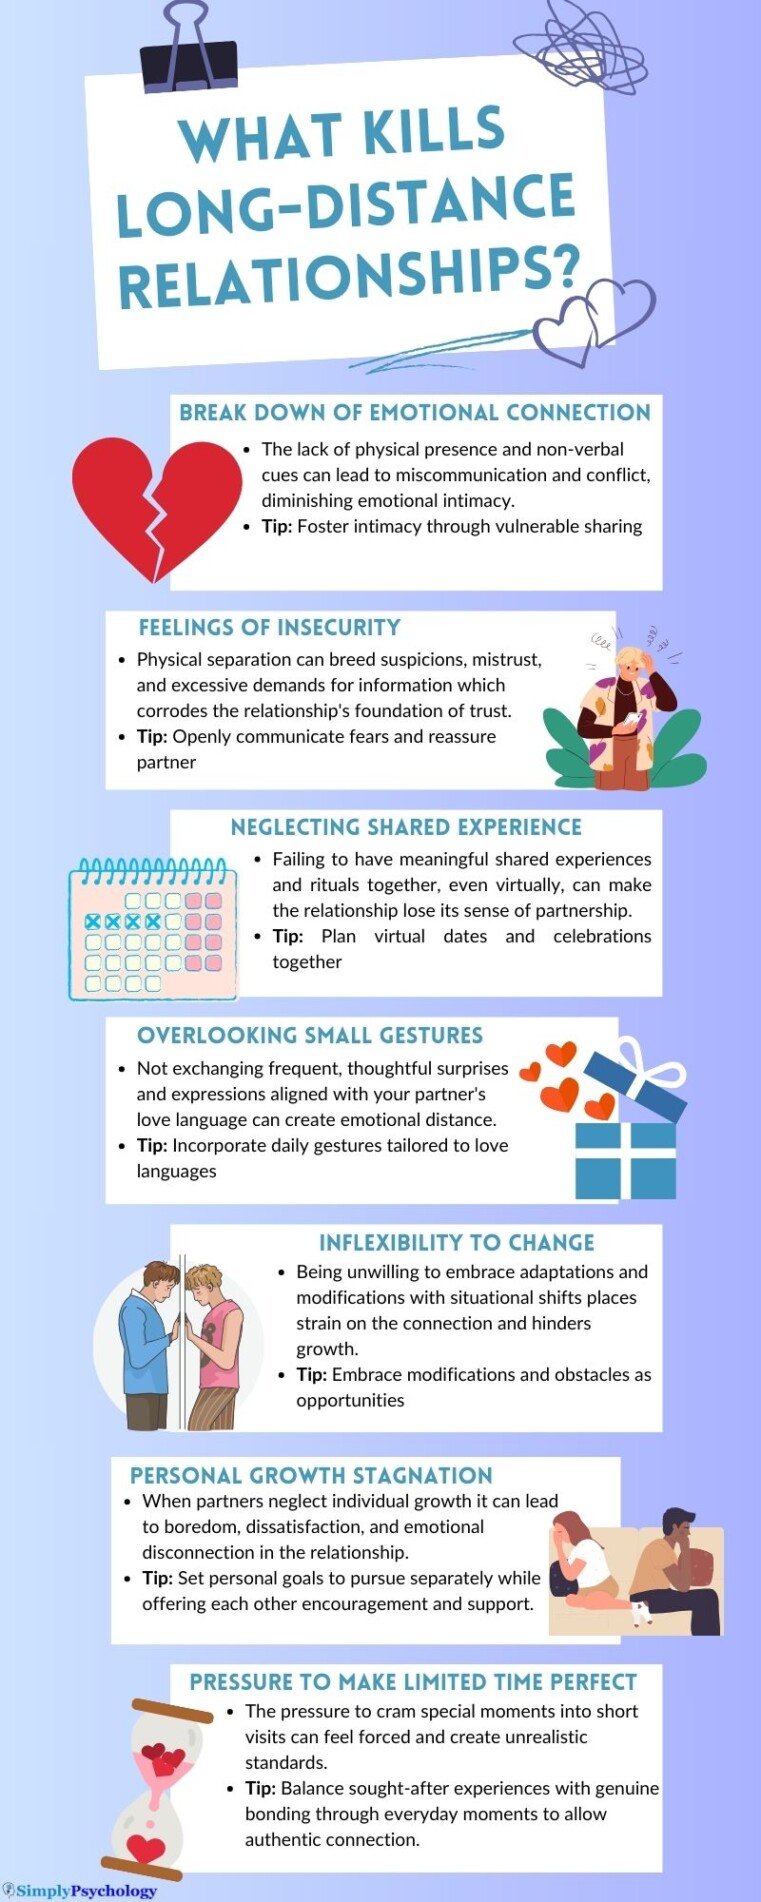 A infographic titled 'What kills long-distance relationships?' It includes the reasons mentioned in the article as well as a brief tip for overcoming each one.